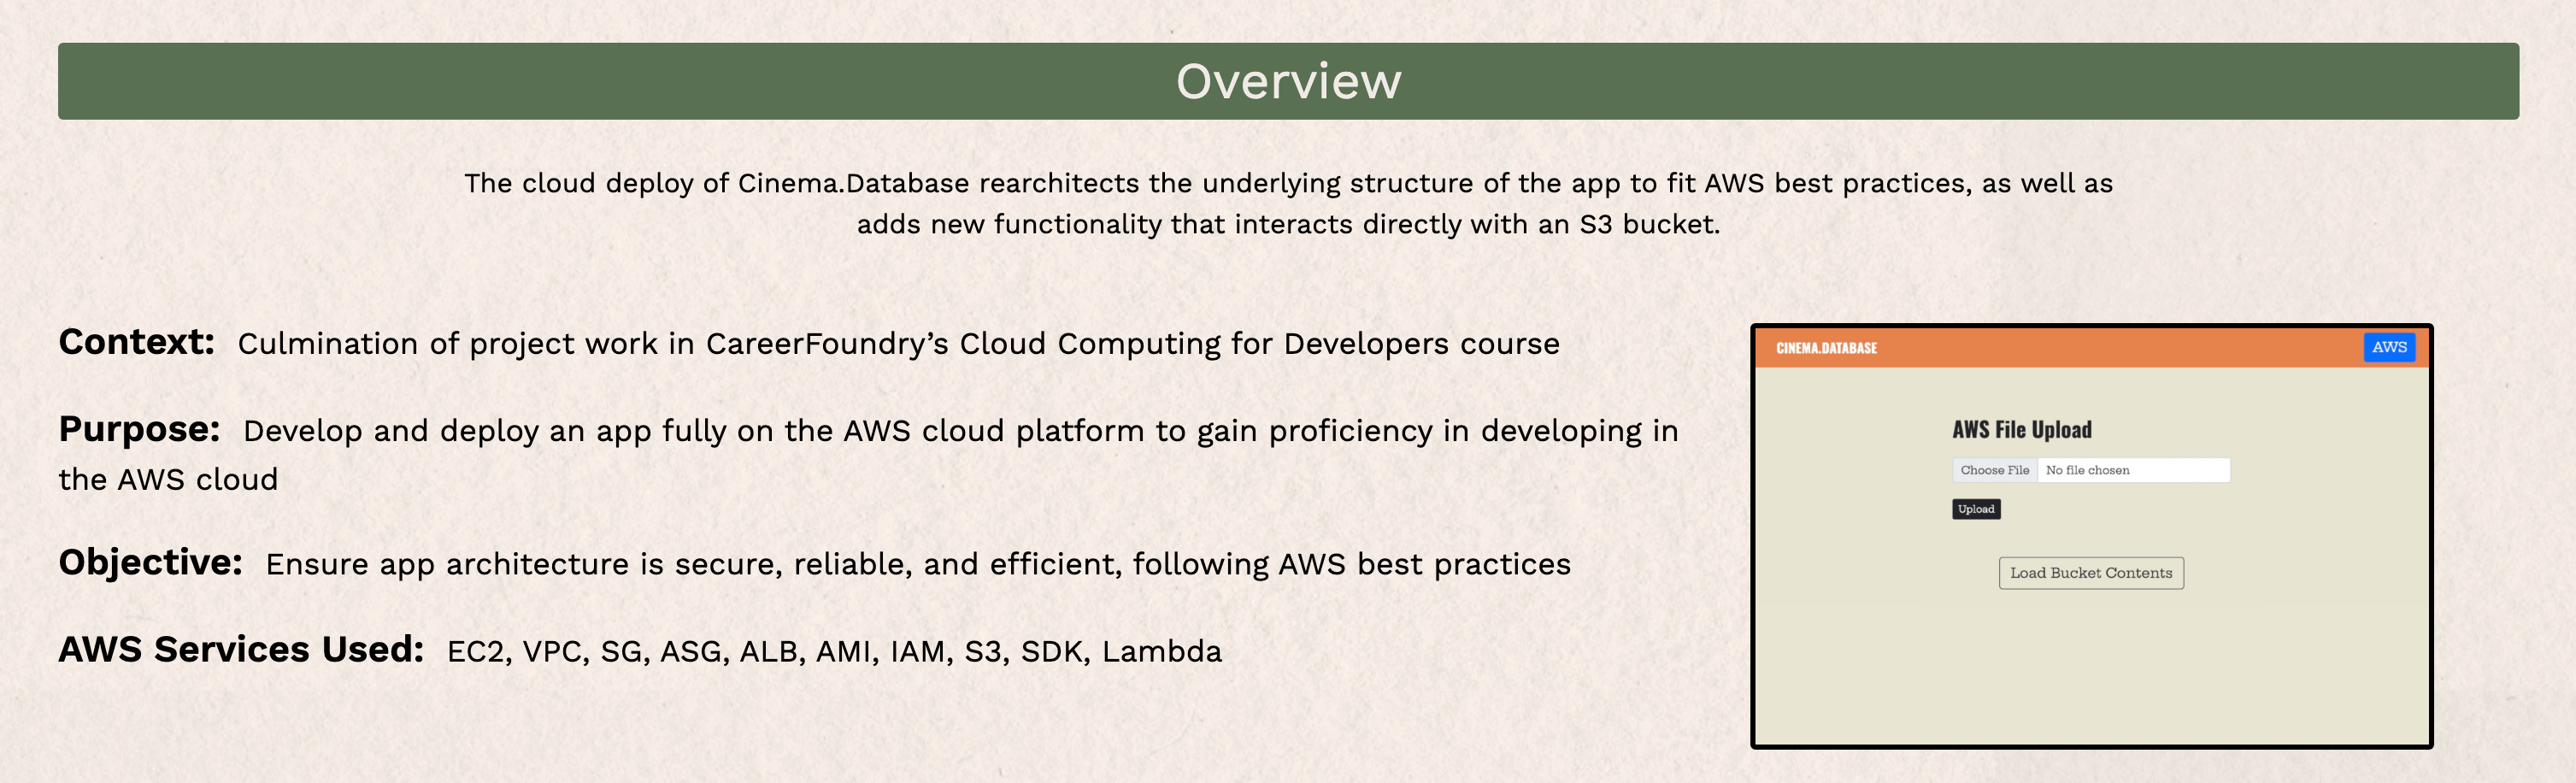 An AWS refactoring project from the Cloud Computing for Web Developers specialization course at CareerFoundry, by Liz Stone